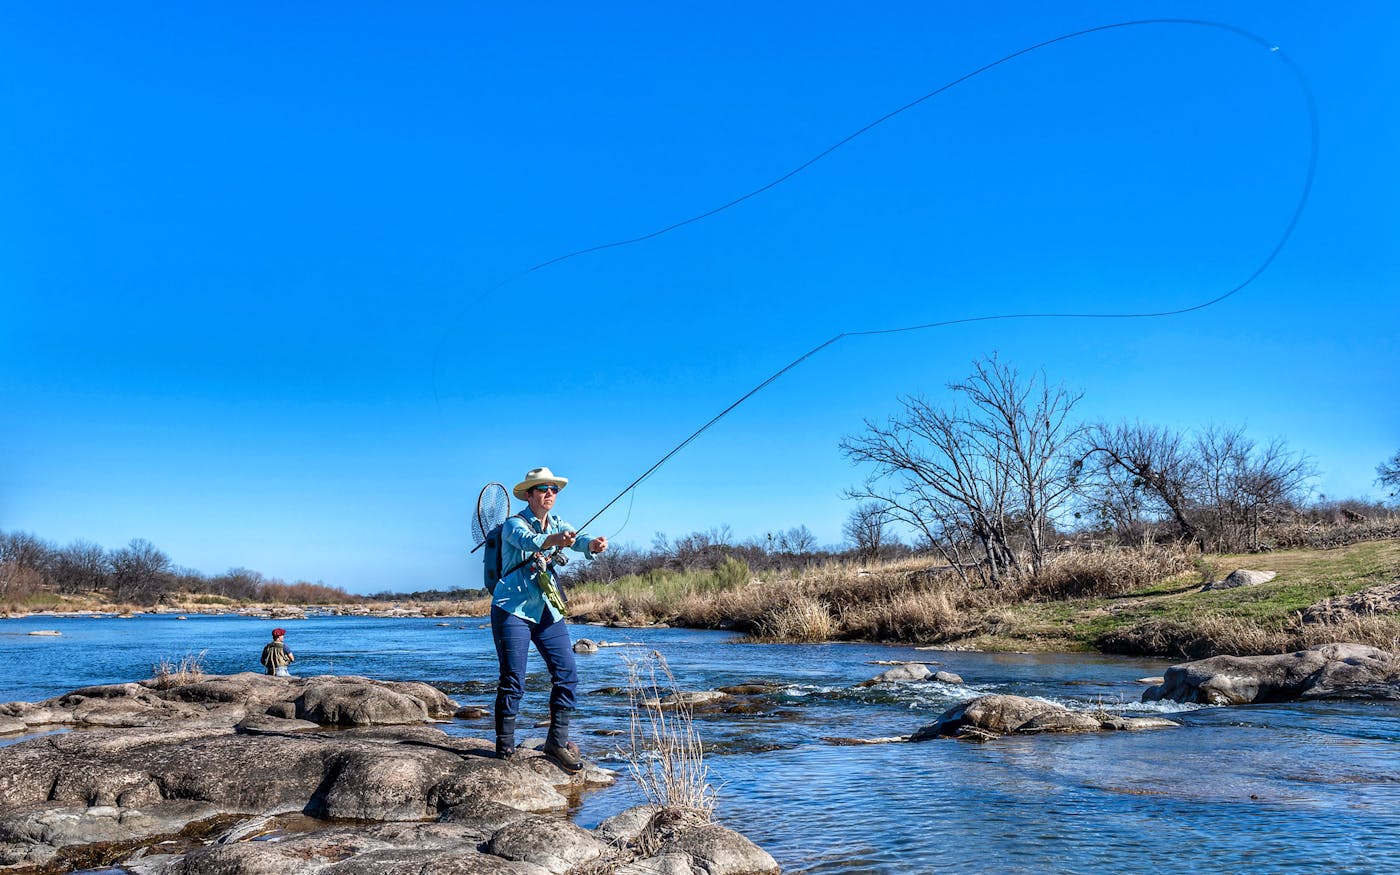 Central Texas fly-fishing is reel fun for everyone